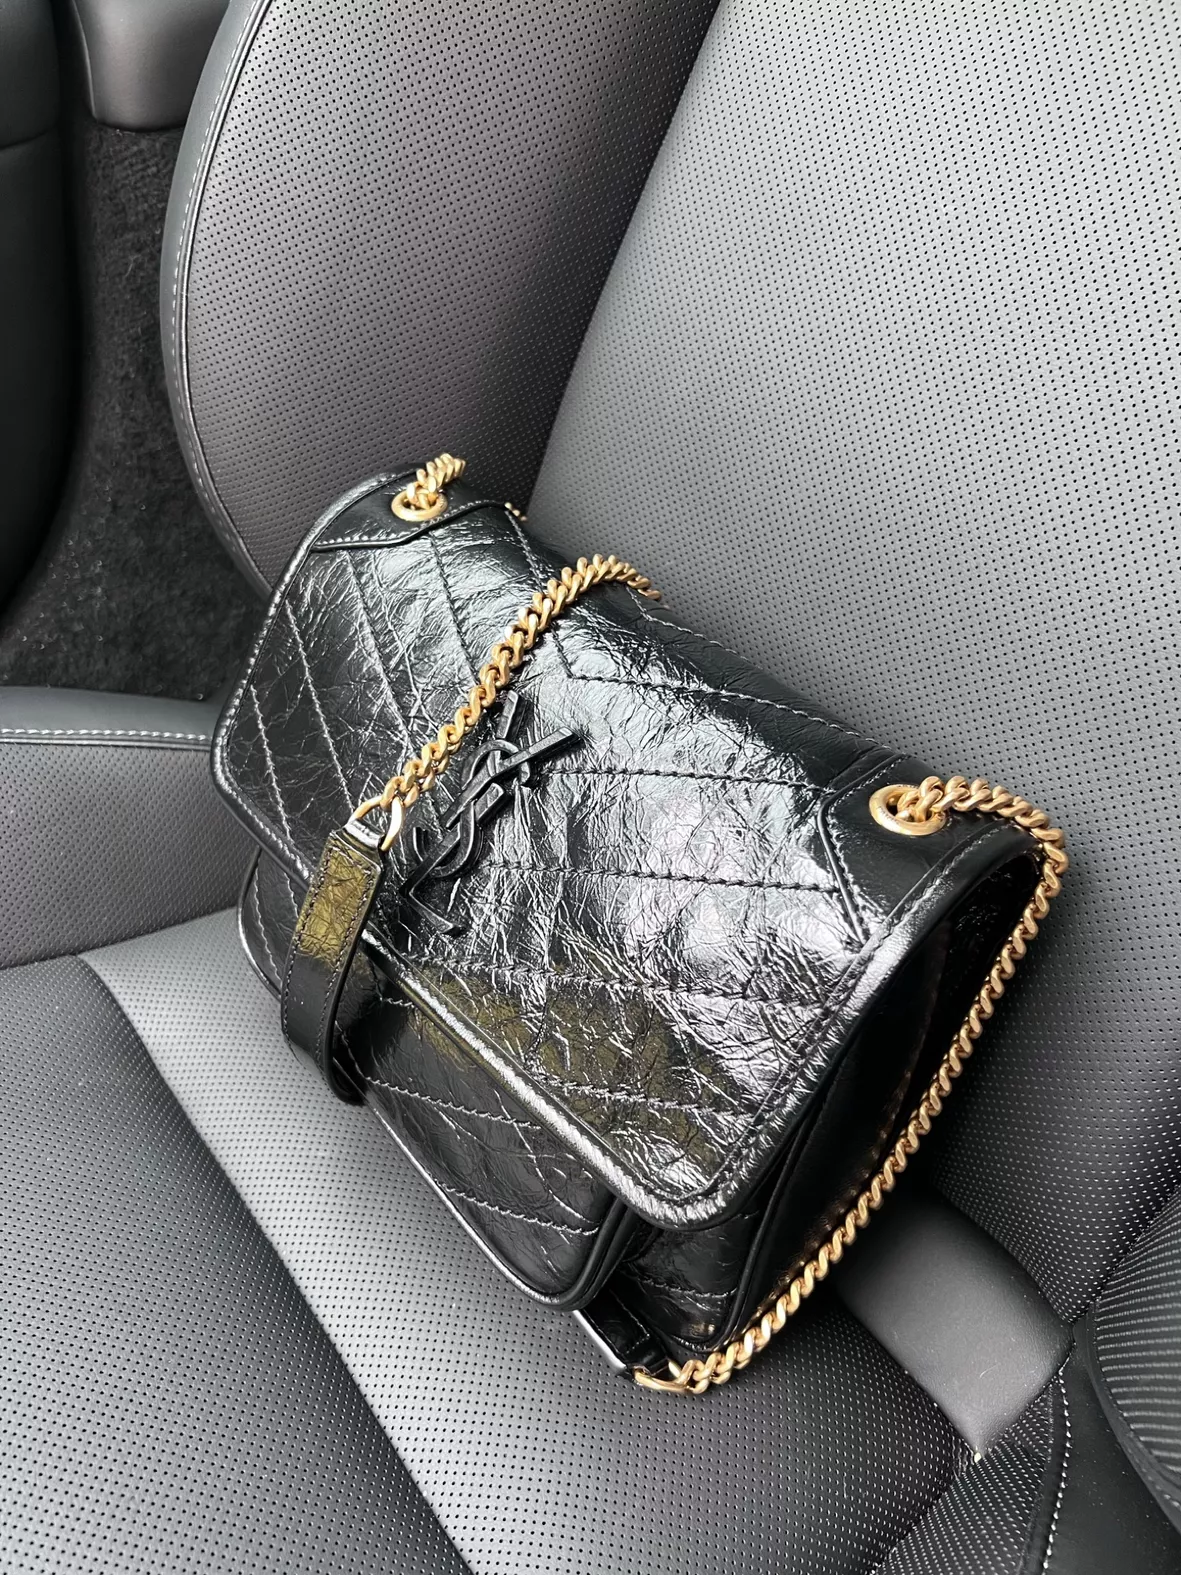 Brand New YSL Niki Baby in Vintage All Black Leather and Hardware